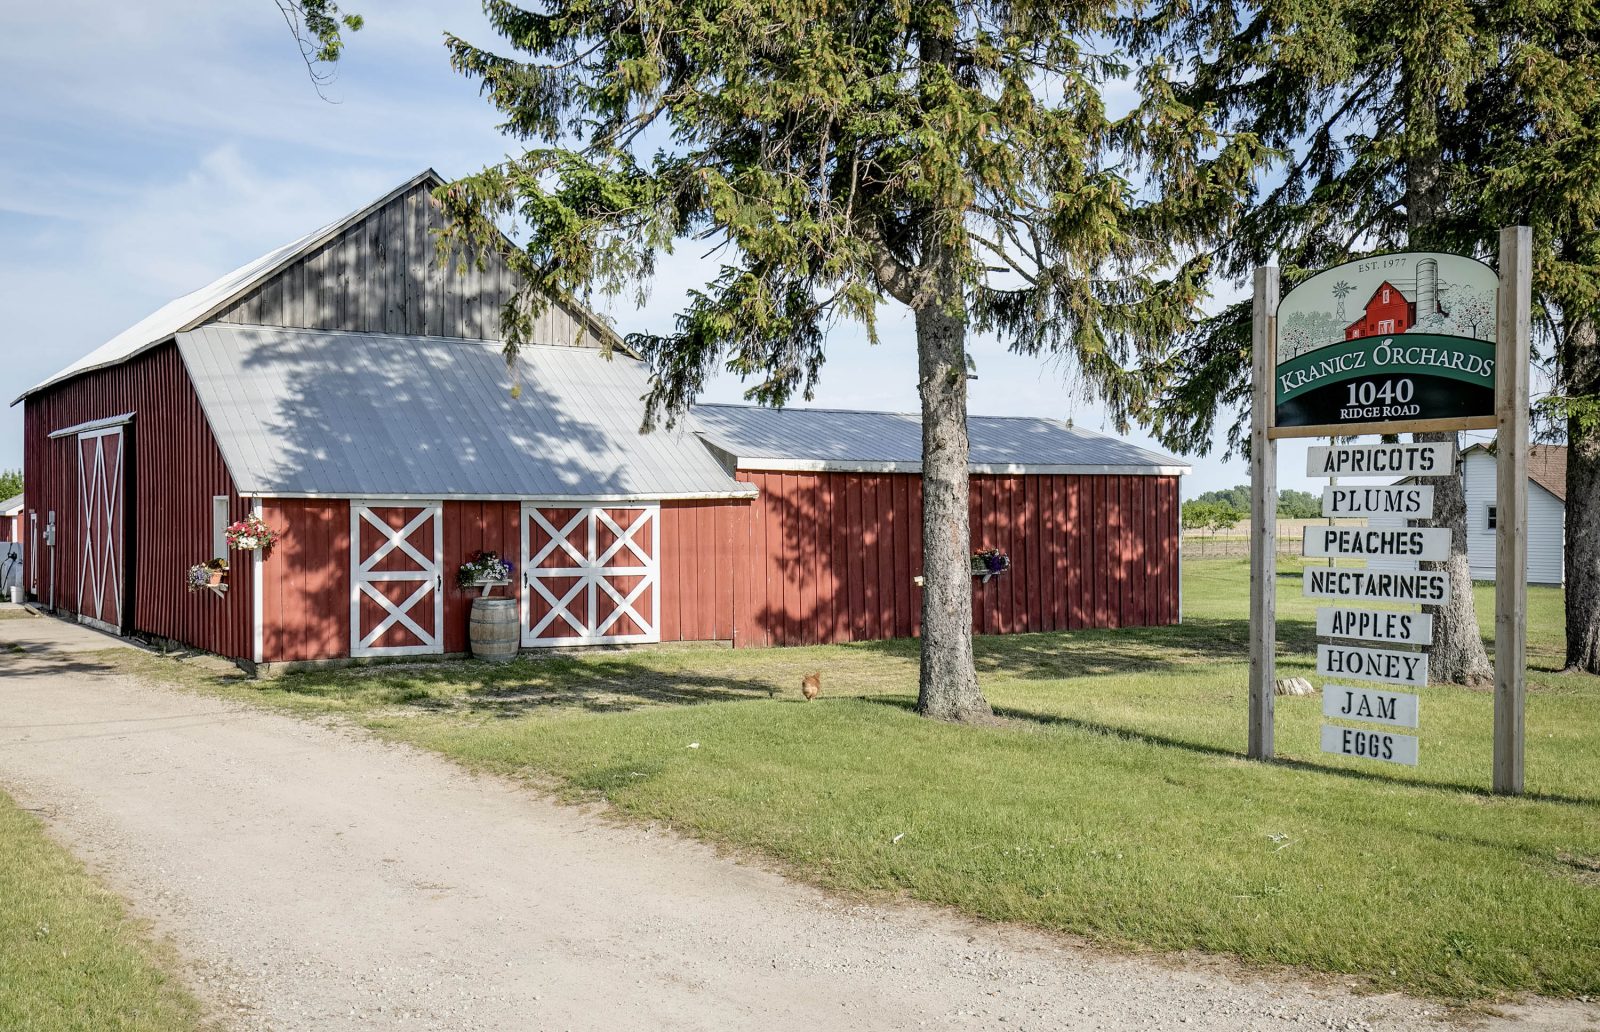 A red barn with a large tree and signage indicating the farm stand’s offerings in front.